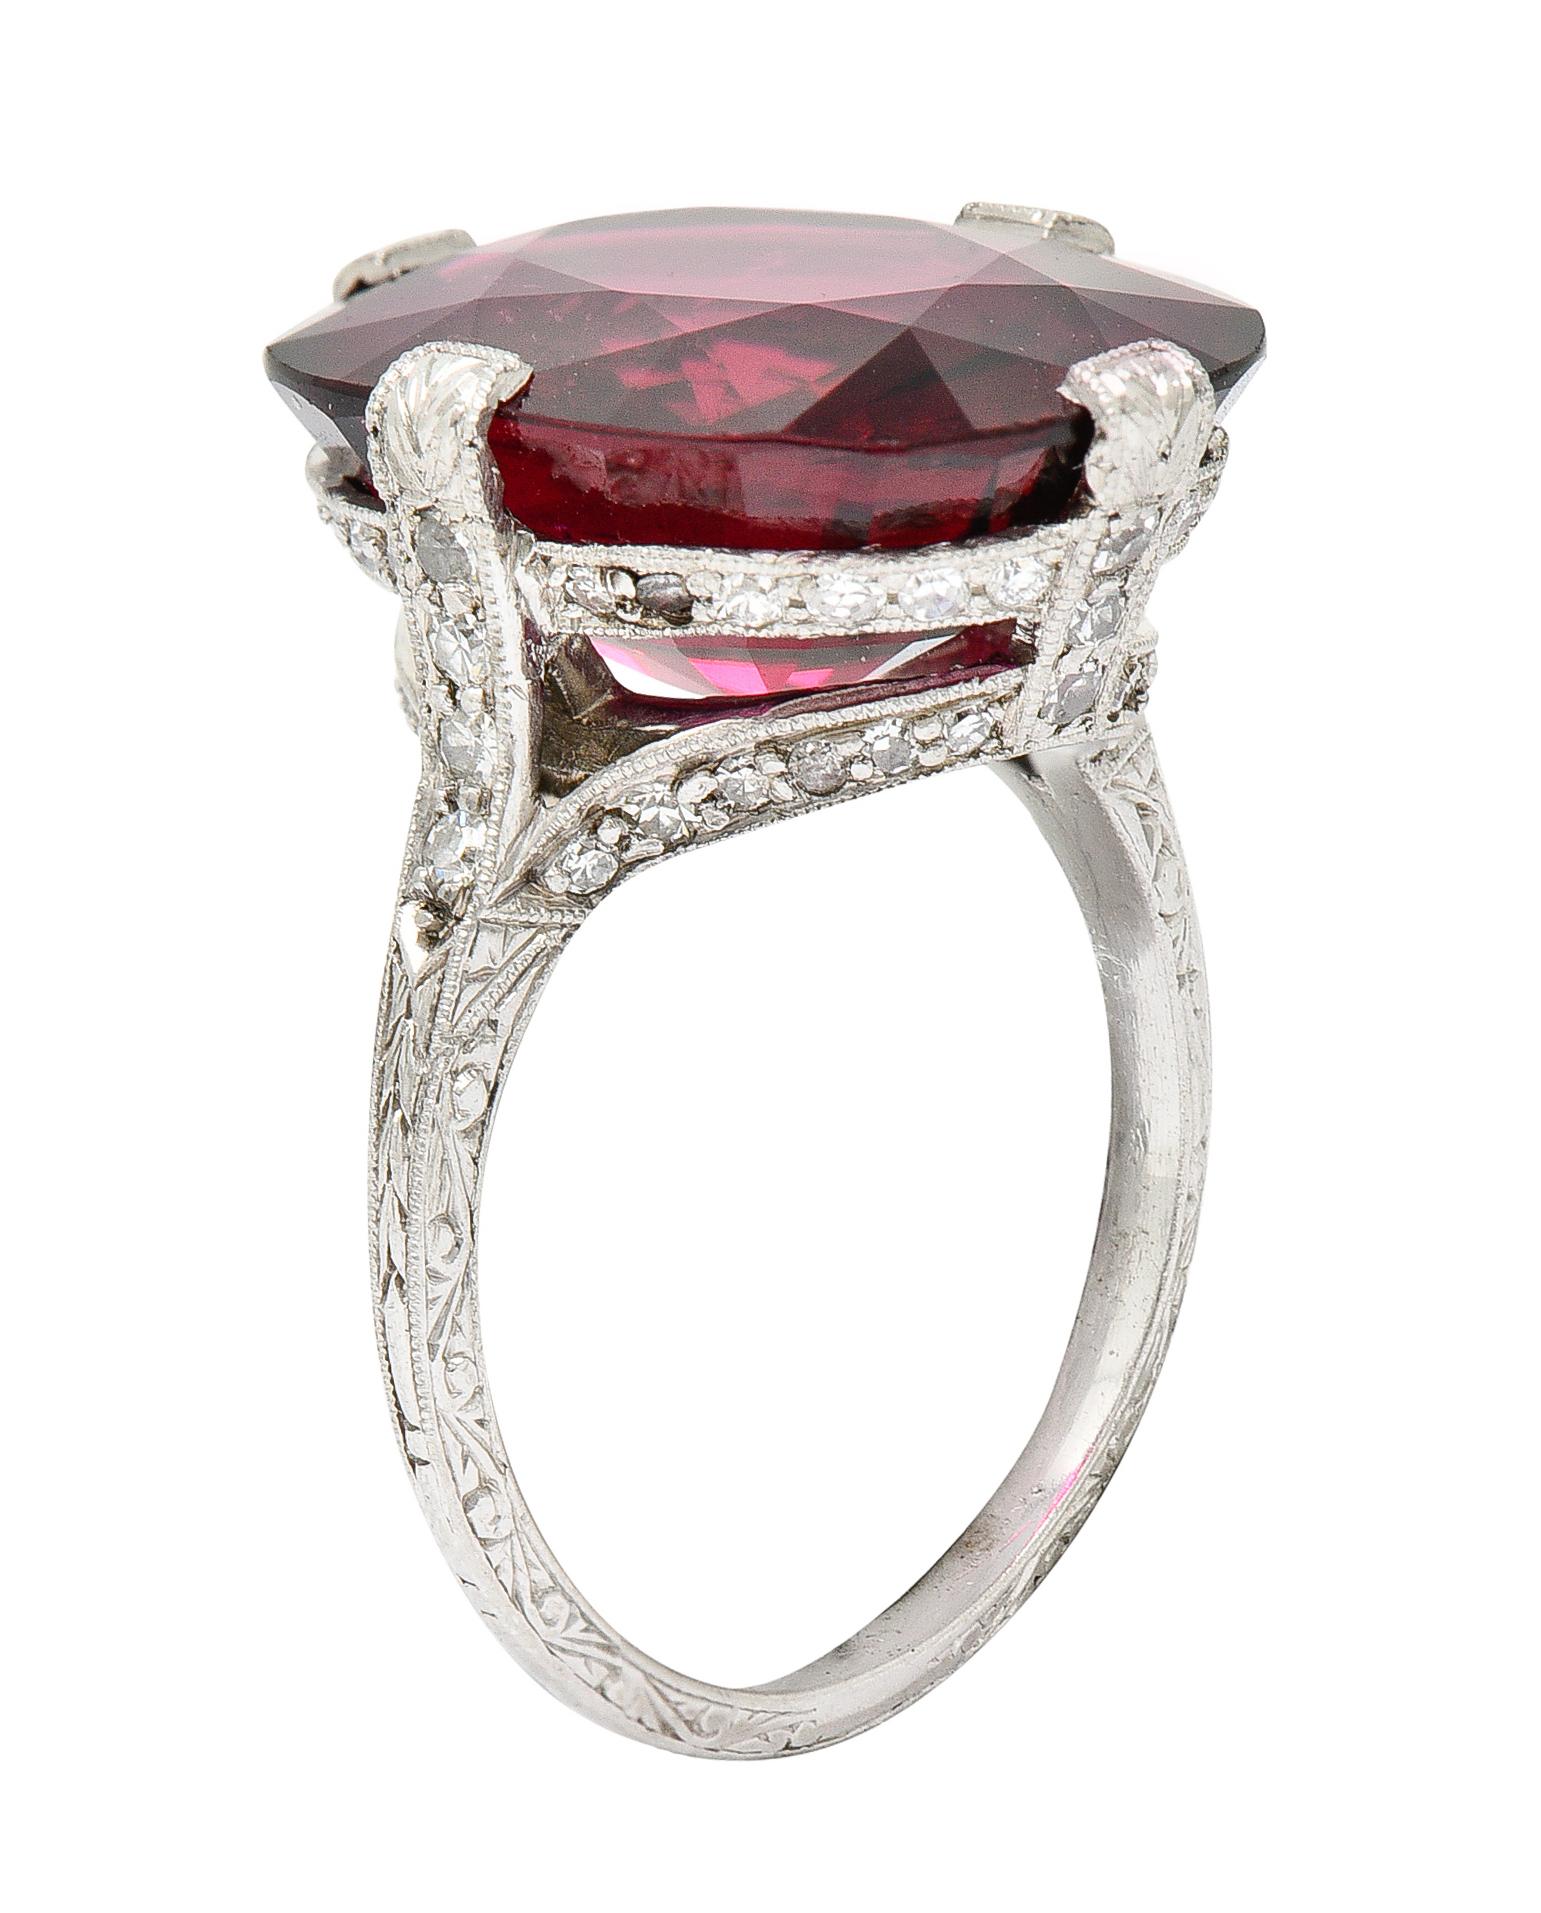 Featuring a cushion cut rubellite tourmaline weighing 10.96 carats. Eye clean and red to strongly purplish red in color with strong saturation. Basket set by wide and stylized prongs accented by single cut diamonds. Weighing collectively